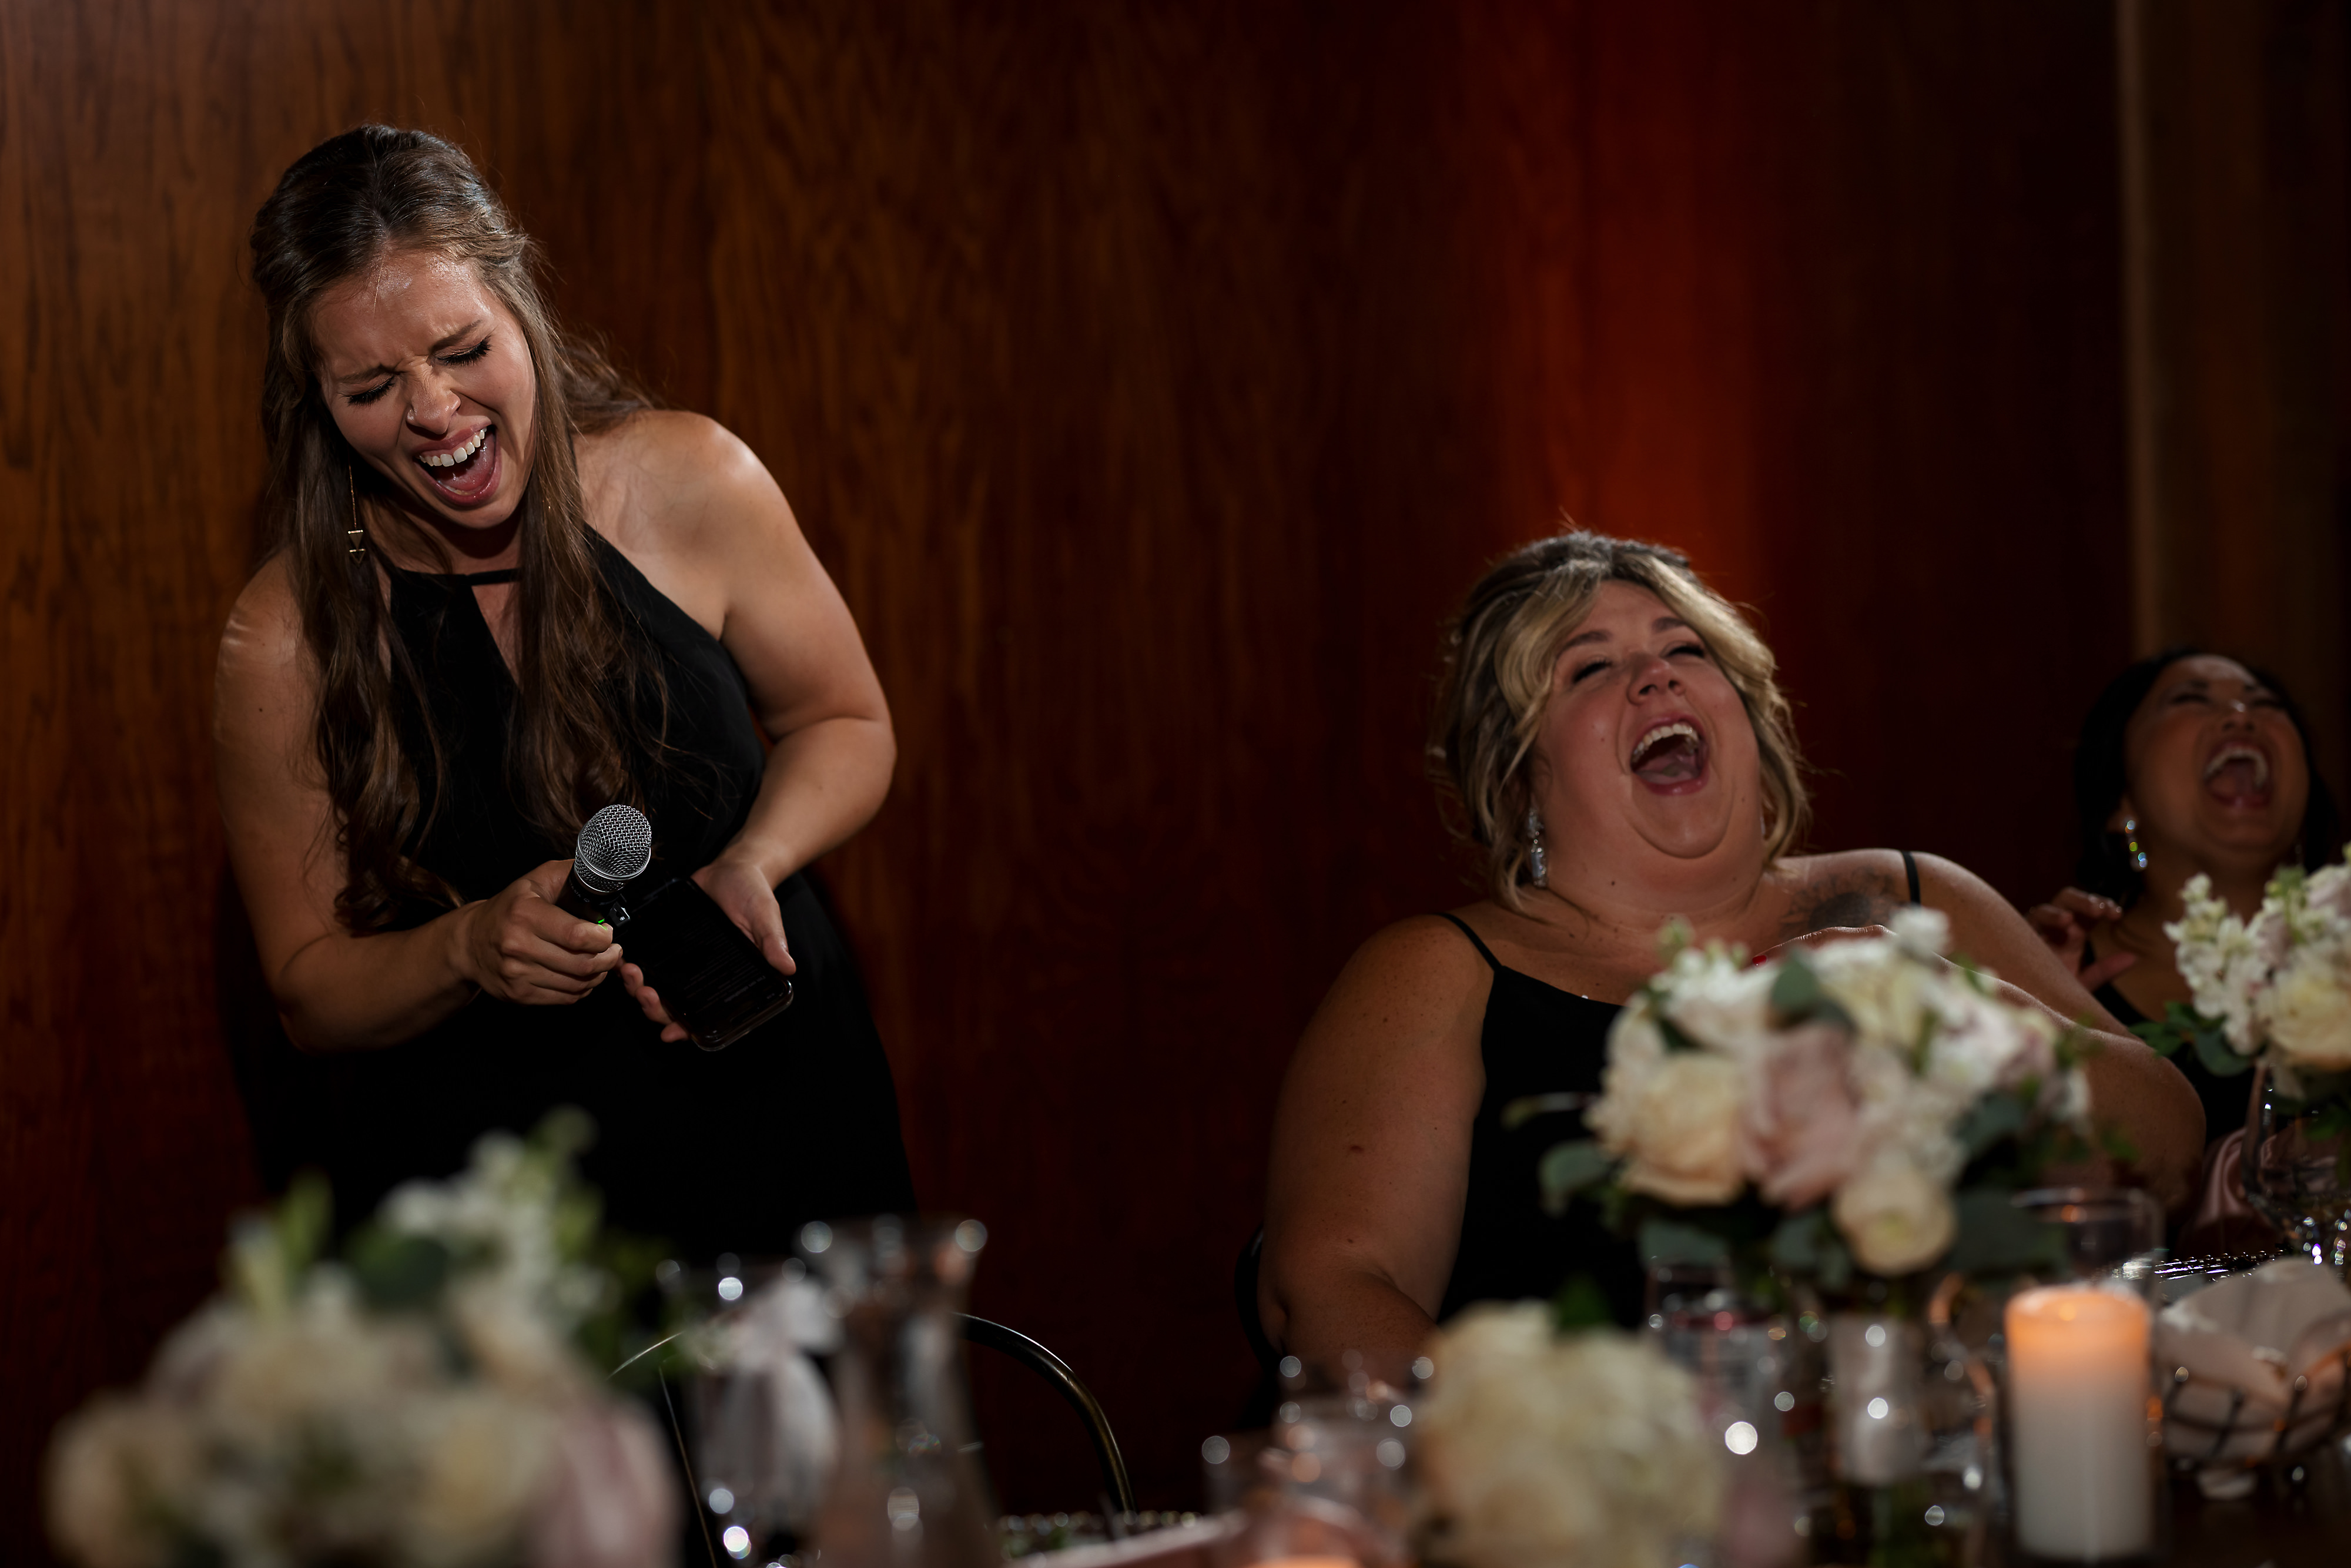 Maid of honor gives toast during Artifact Events wedding reception in Chicago.